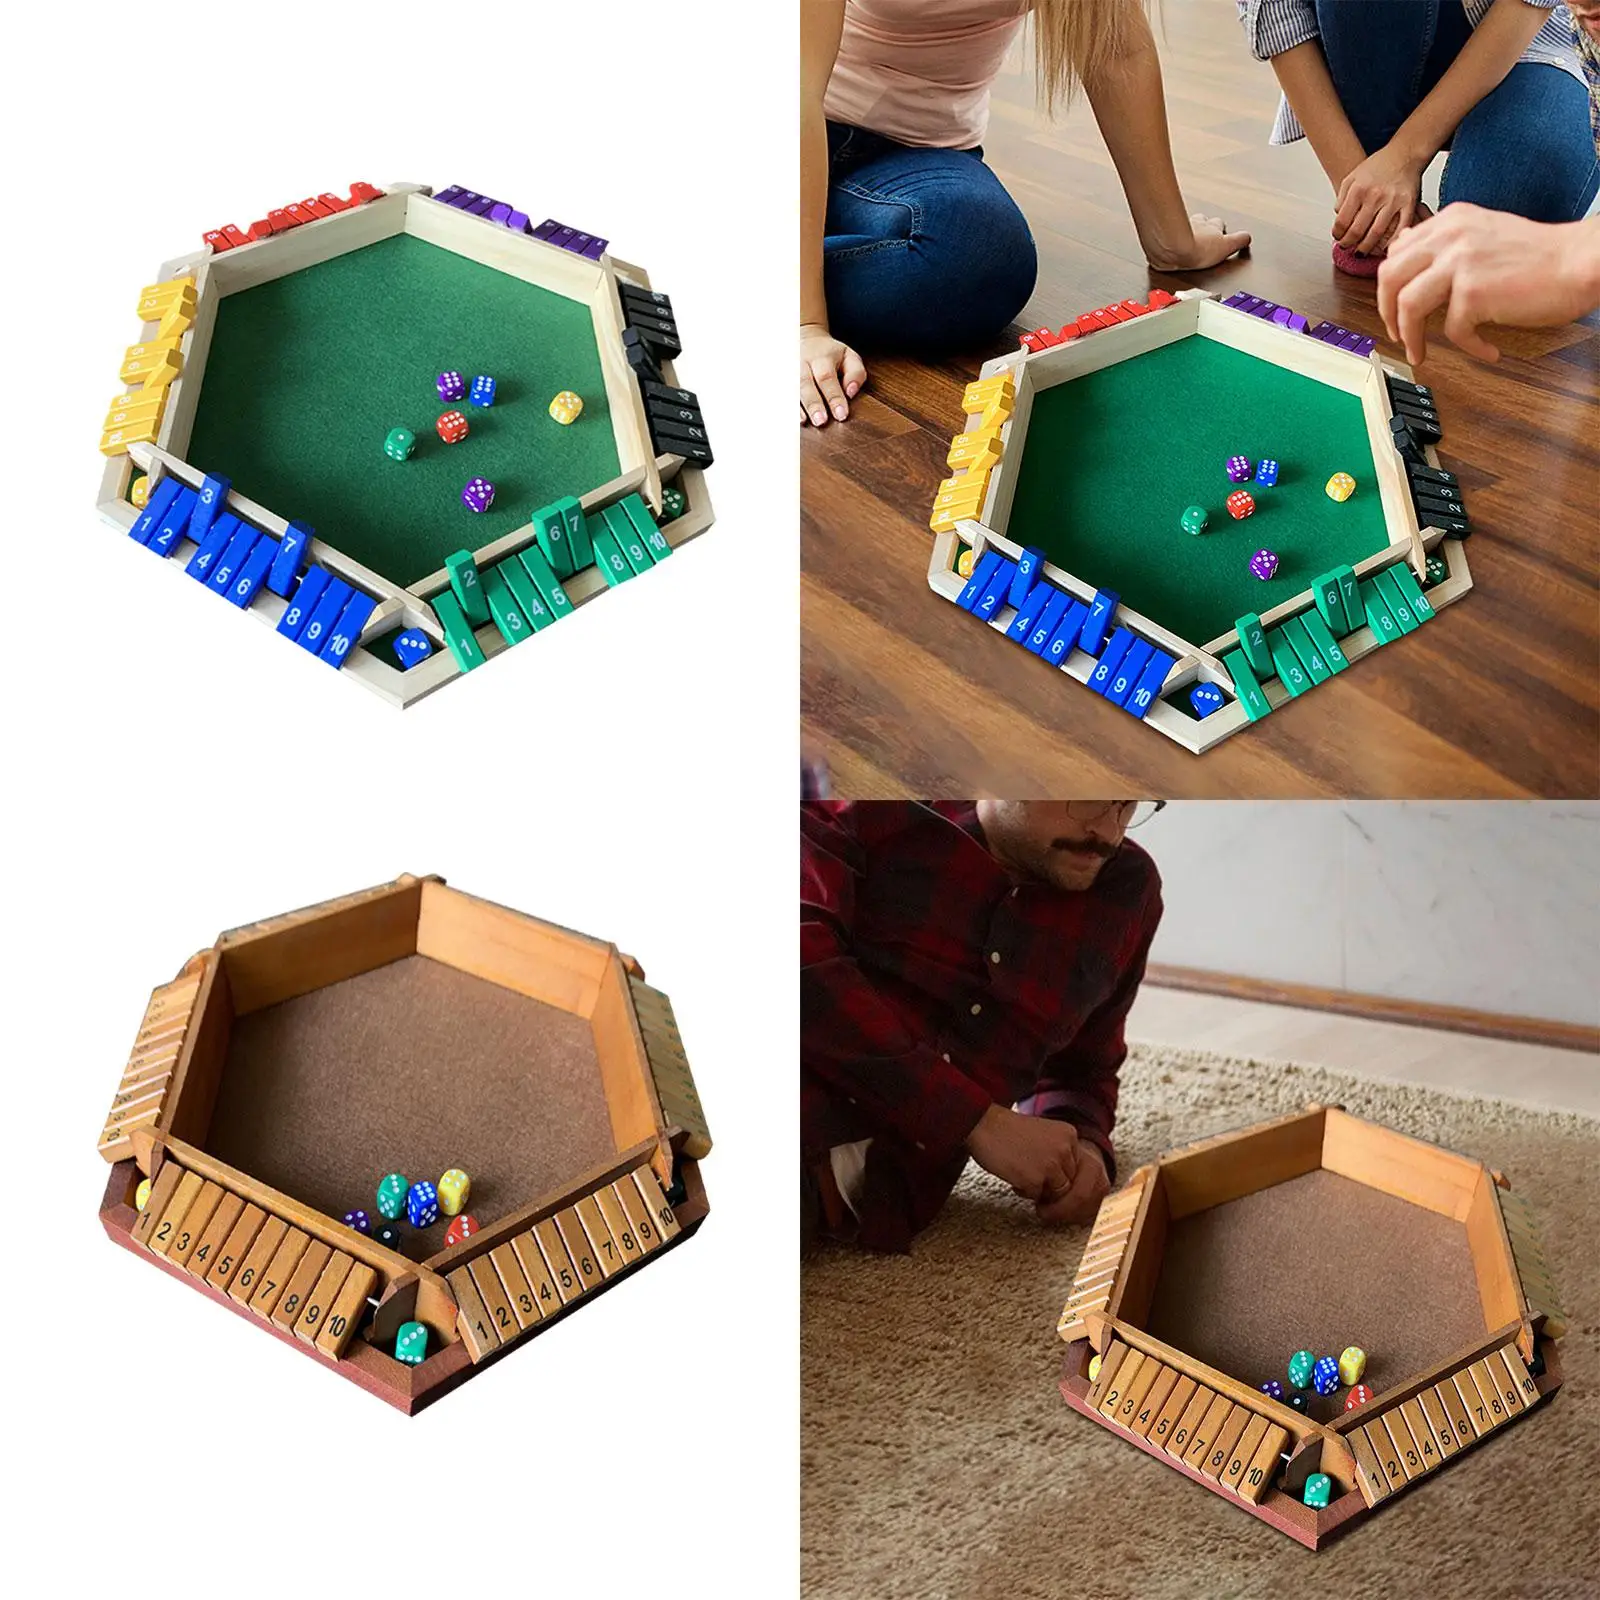 Wooden Table Dice Games 2-6 Players Wooden Table Board for Family Party